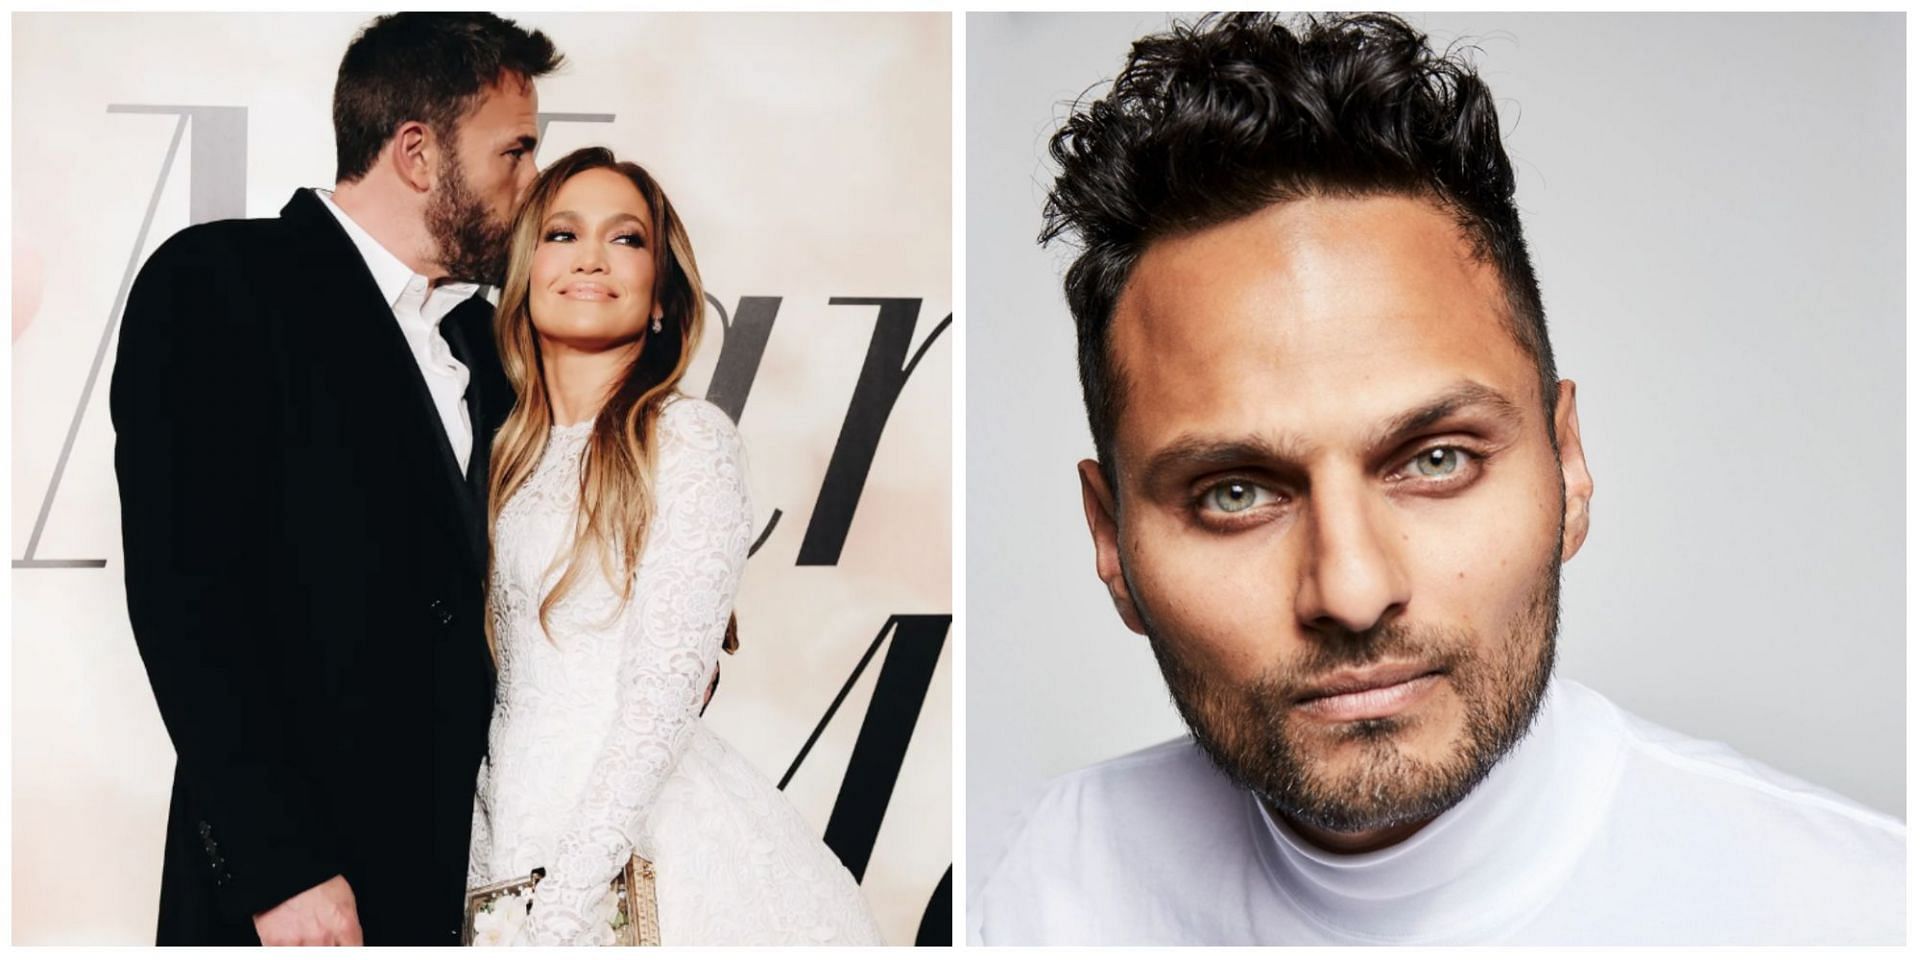 Jay Shetty to officiate second wedding between Jennifer Lopez and